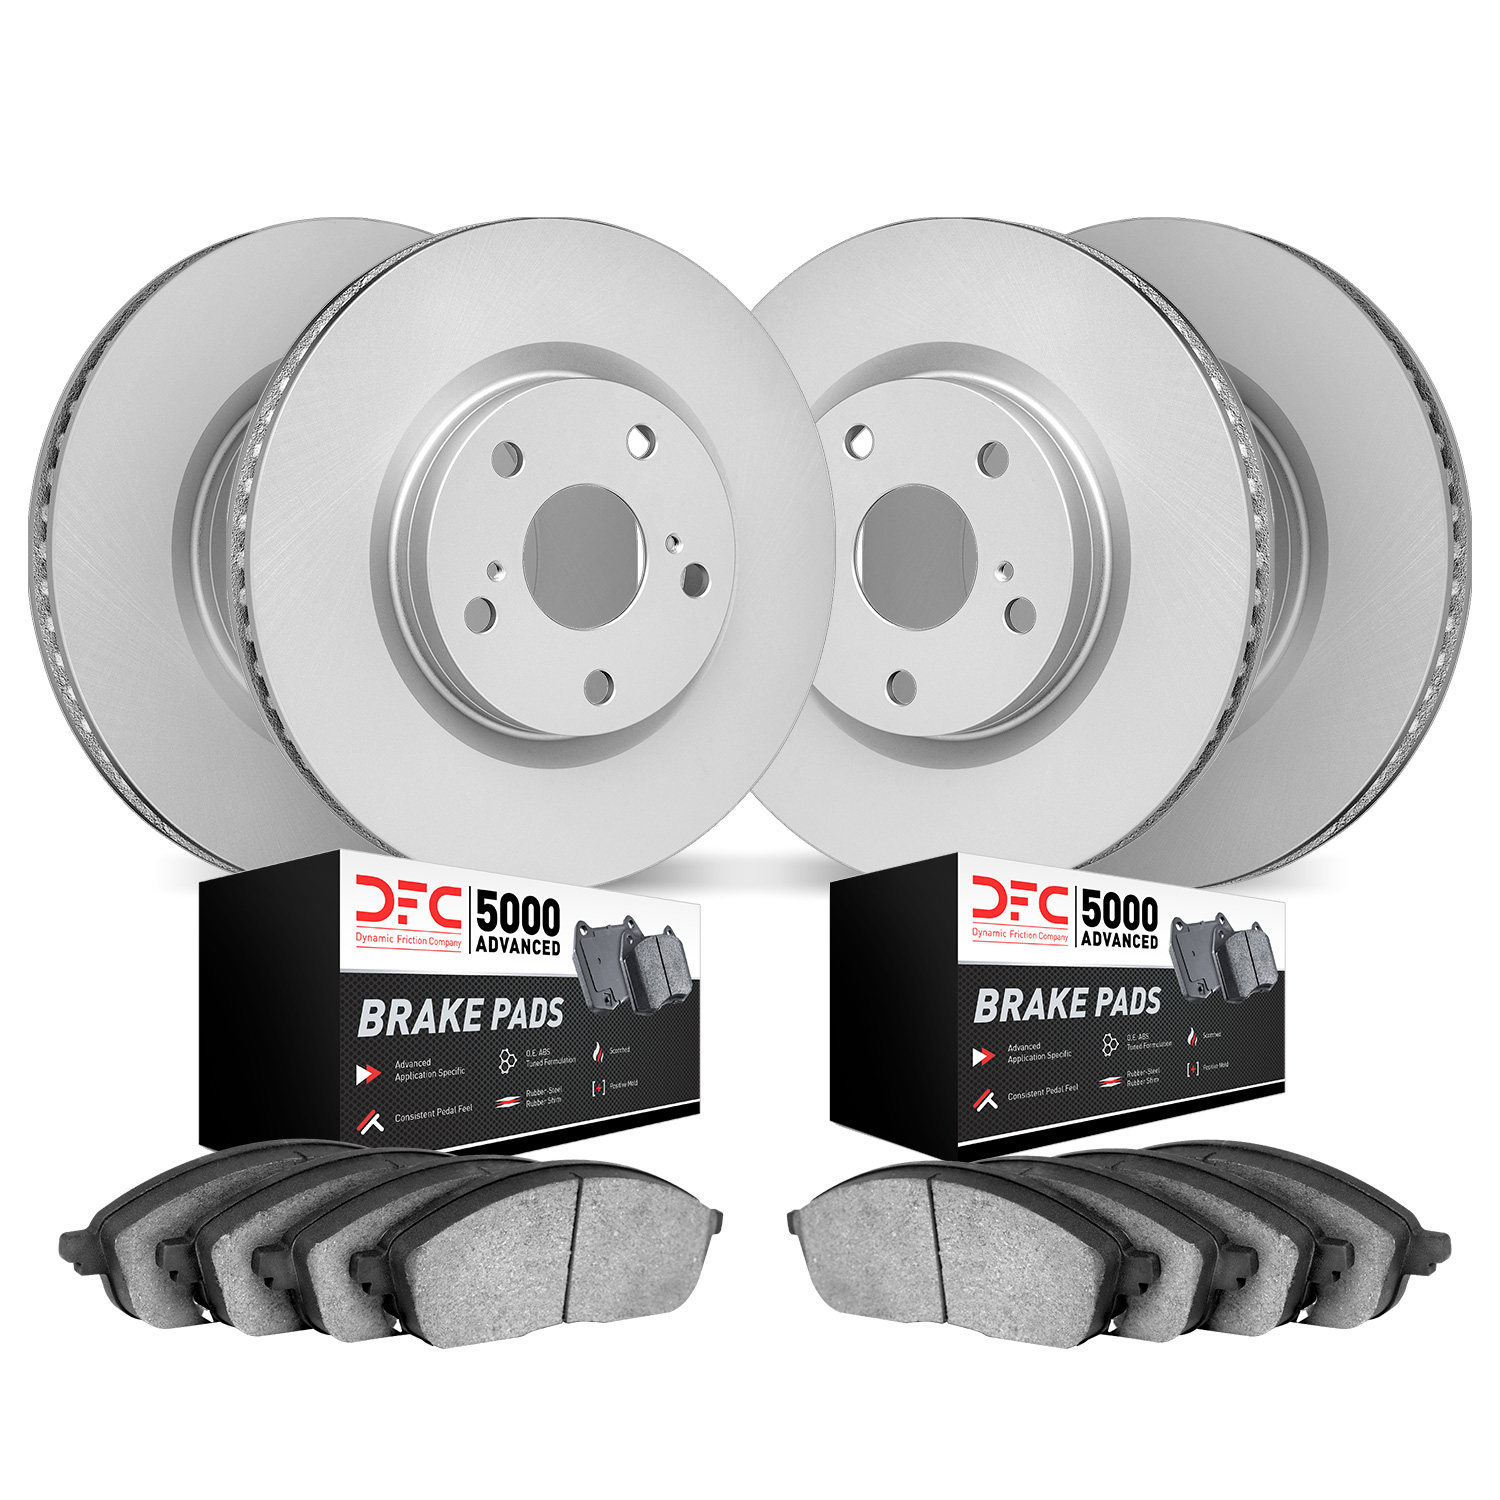 4504-54231 Geospec Brake Rotors w/5000 Advanced Brake Pads Kit, 2016-2020 Ford/Lincoln/Mercury/Mazda, Position: Front and Rear